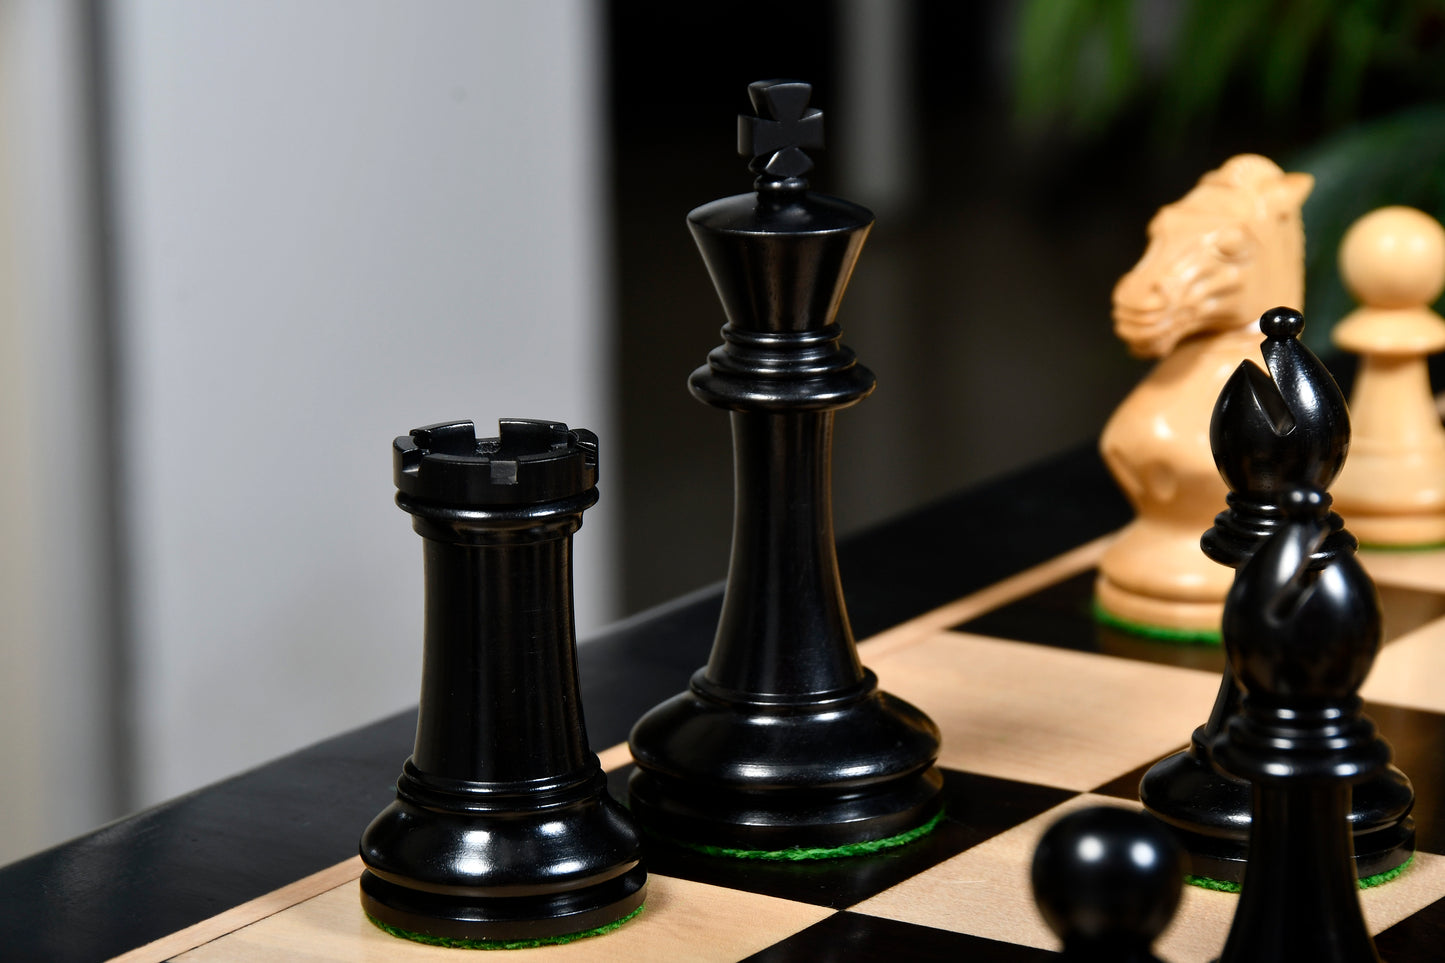 The GM Blitz Edition Staunton Series Chess Pieces in Ebony Wood & Natural Boxwood - 3.75" King